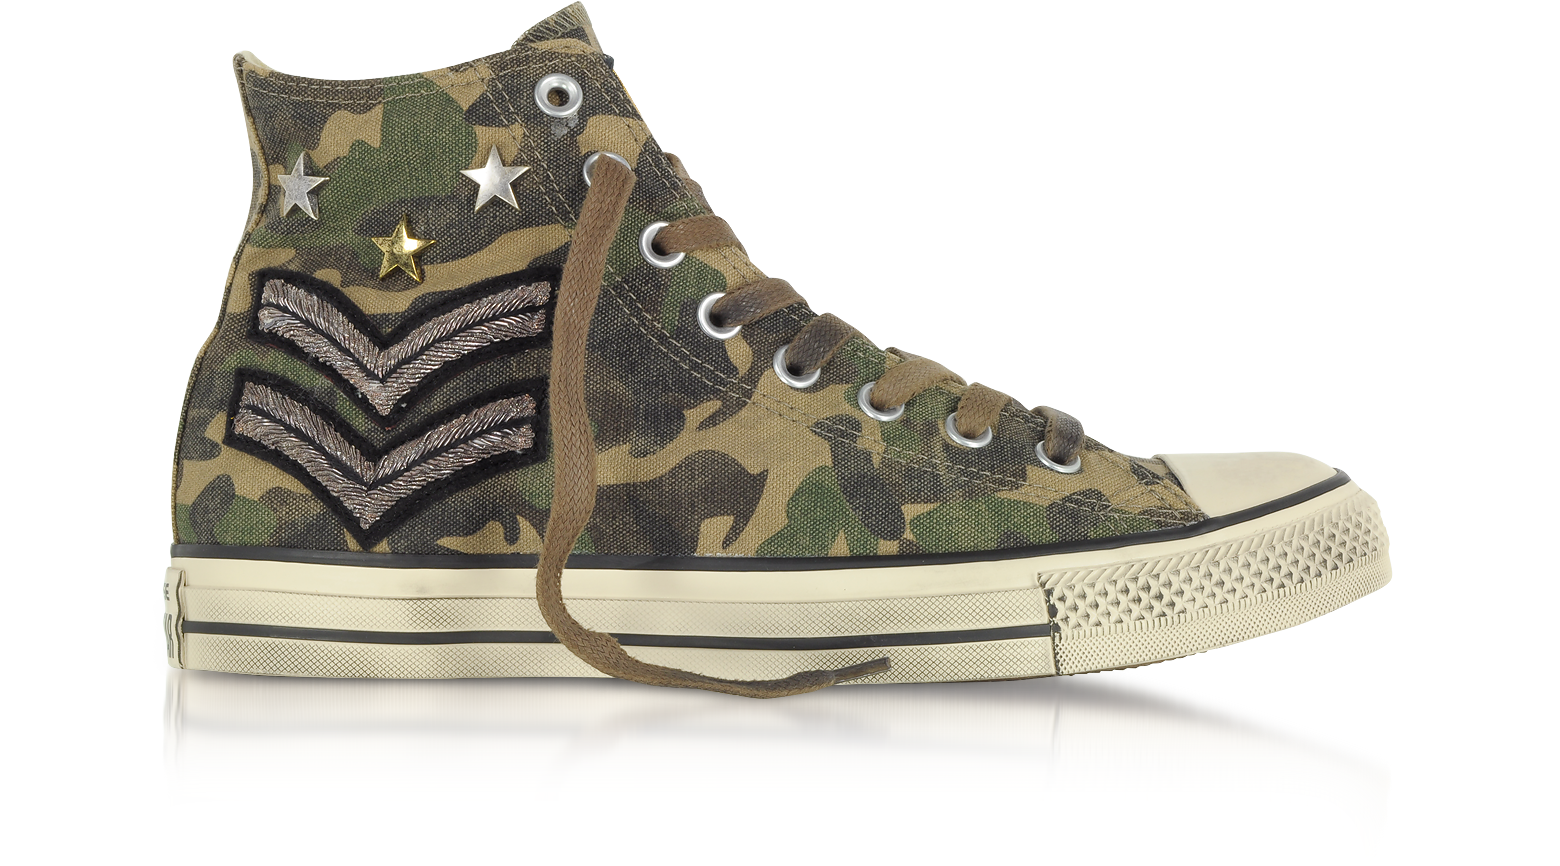 converse military sneakers